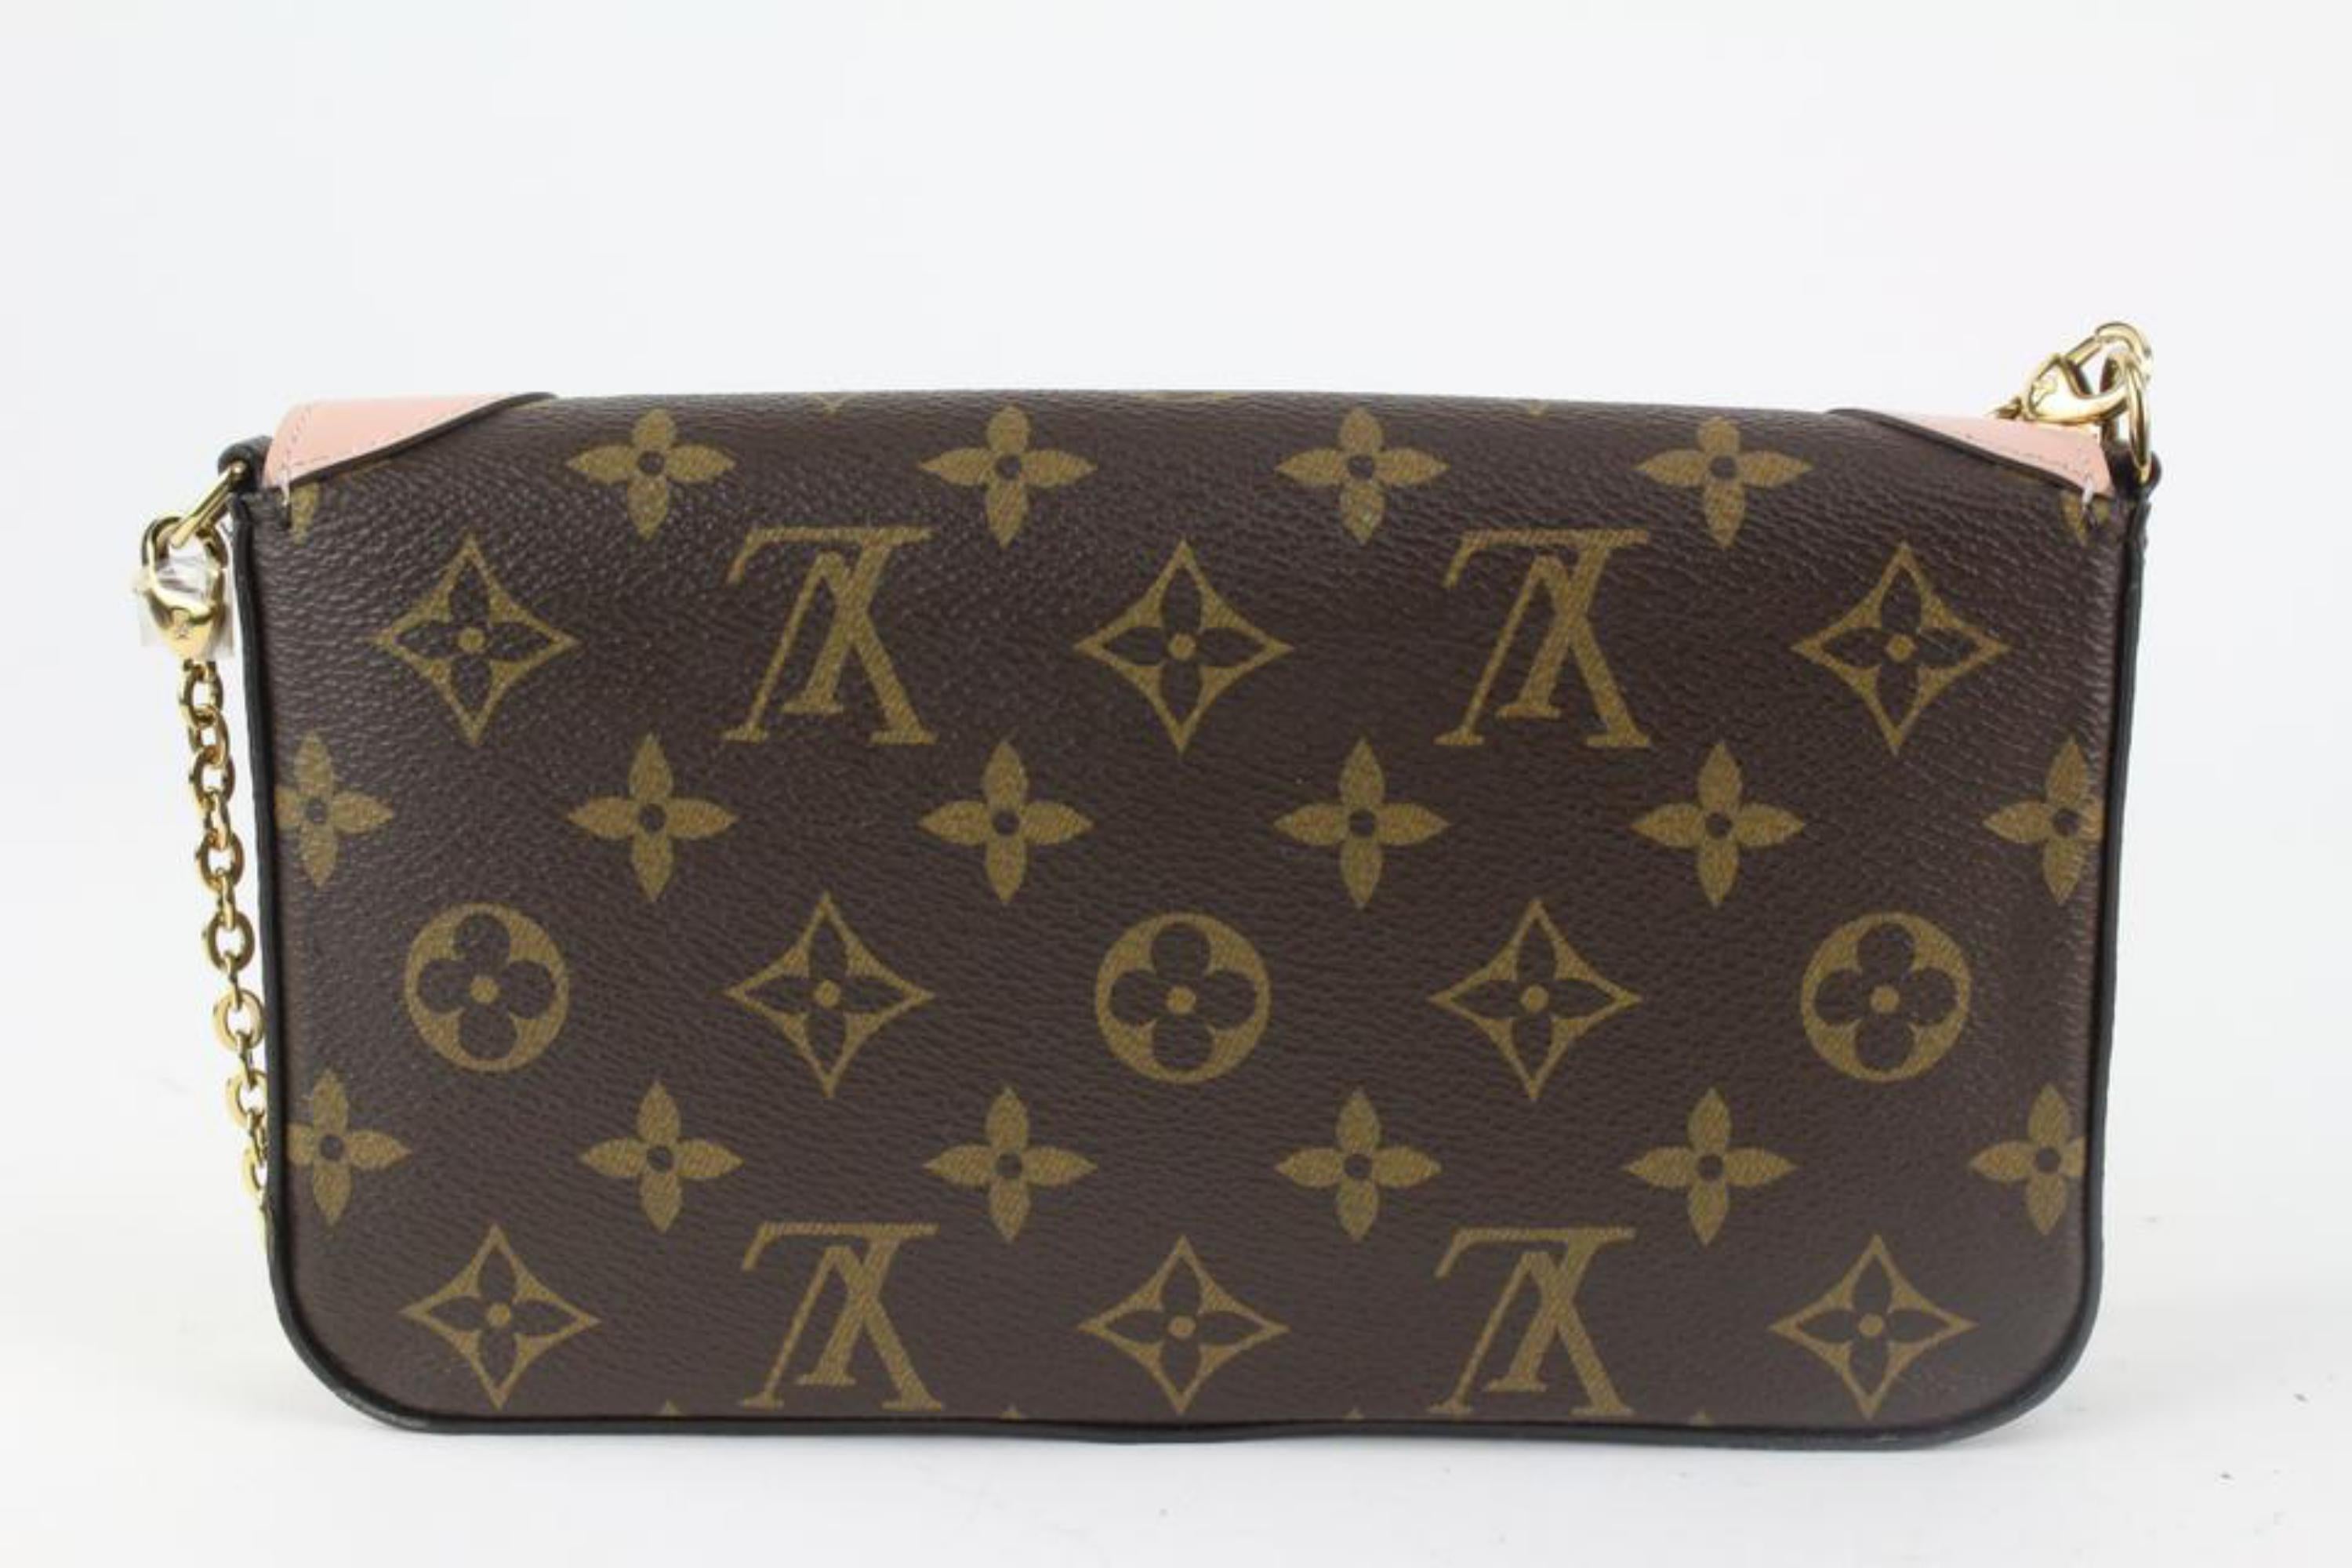 Louis Vuitton Monogram Pink Dog Pochette Felicie Crossbody 1217lv24 In Excellent Condition For Sale In Dix hills, NY